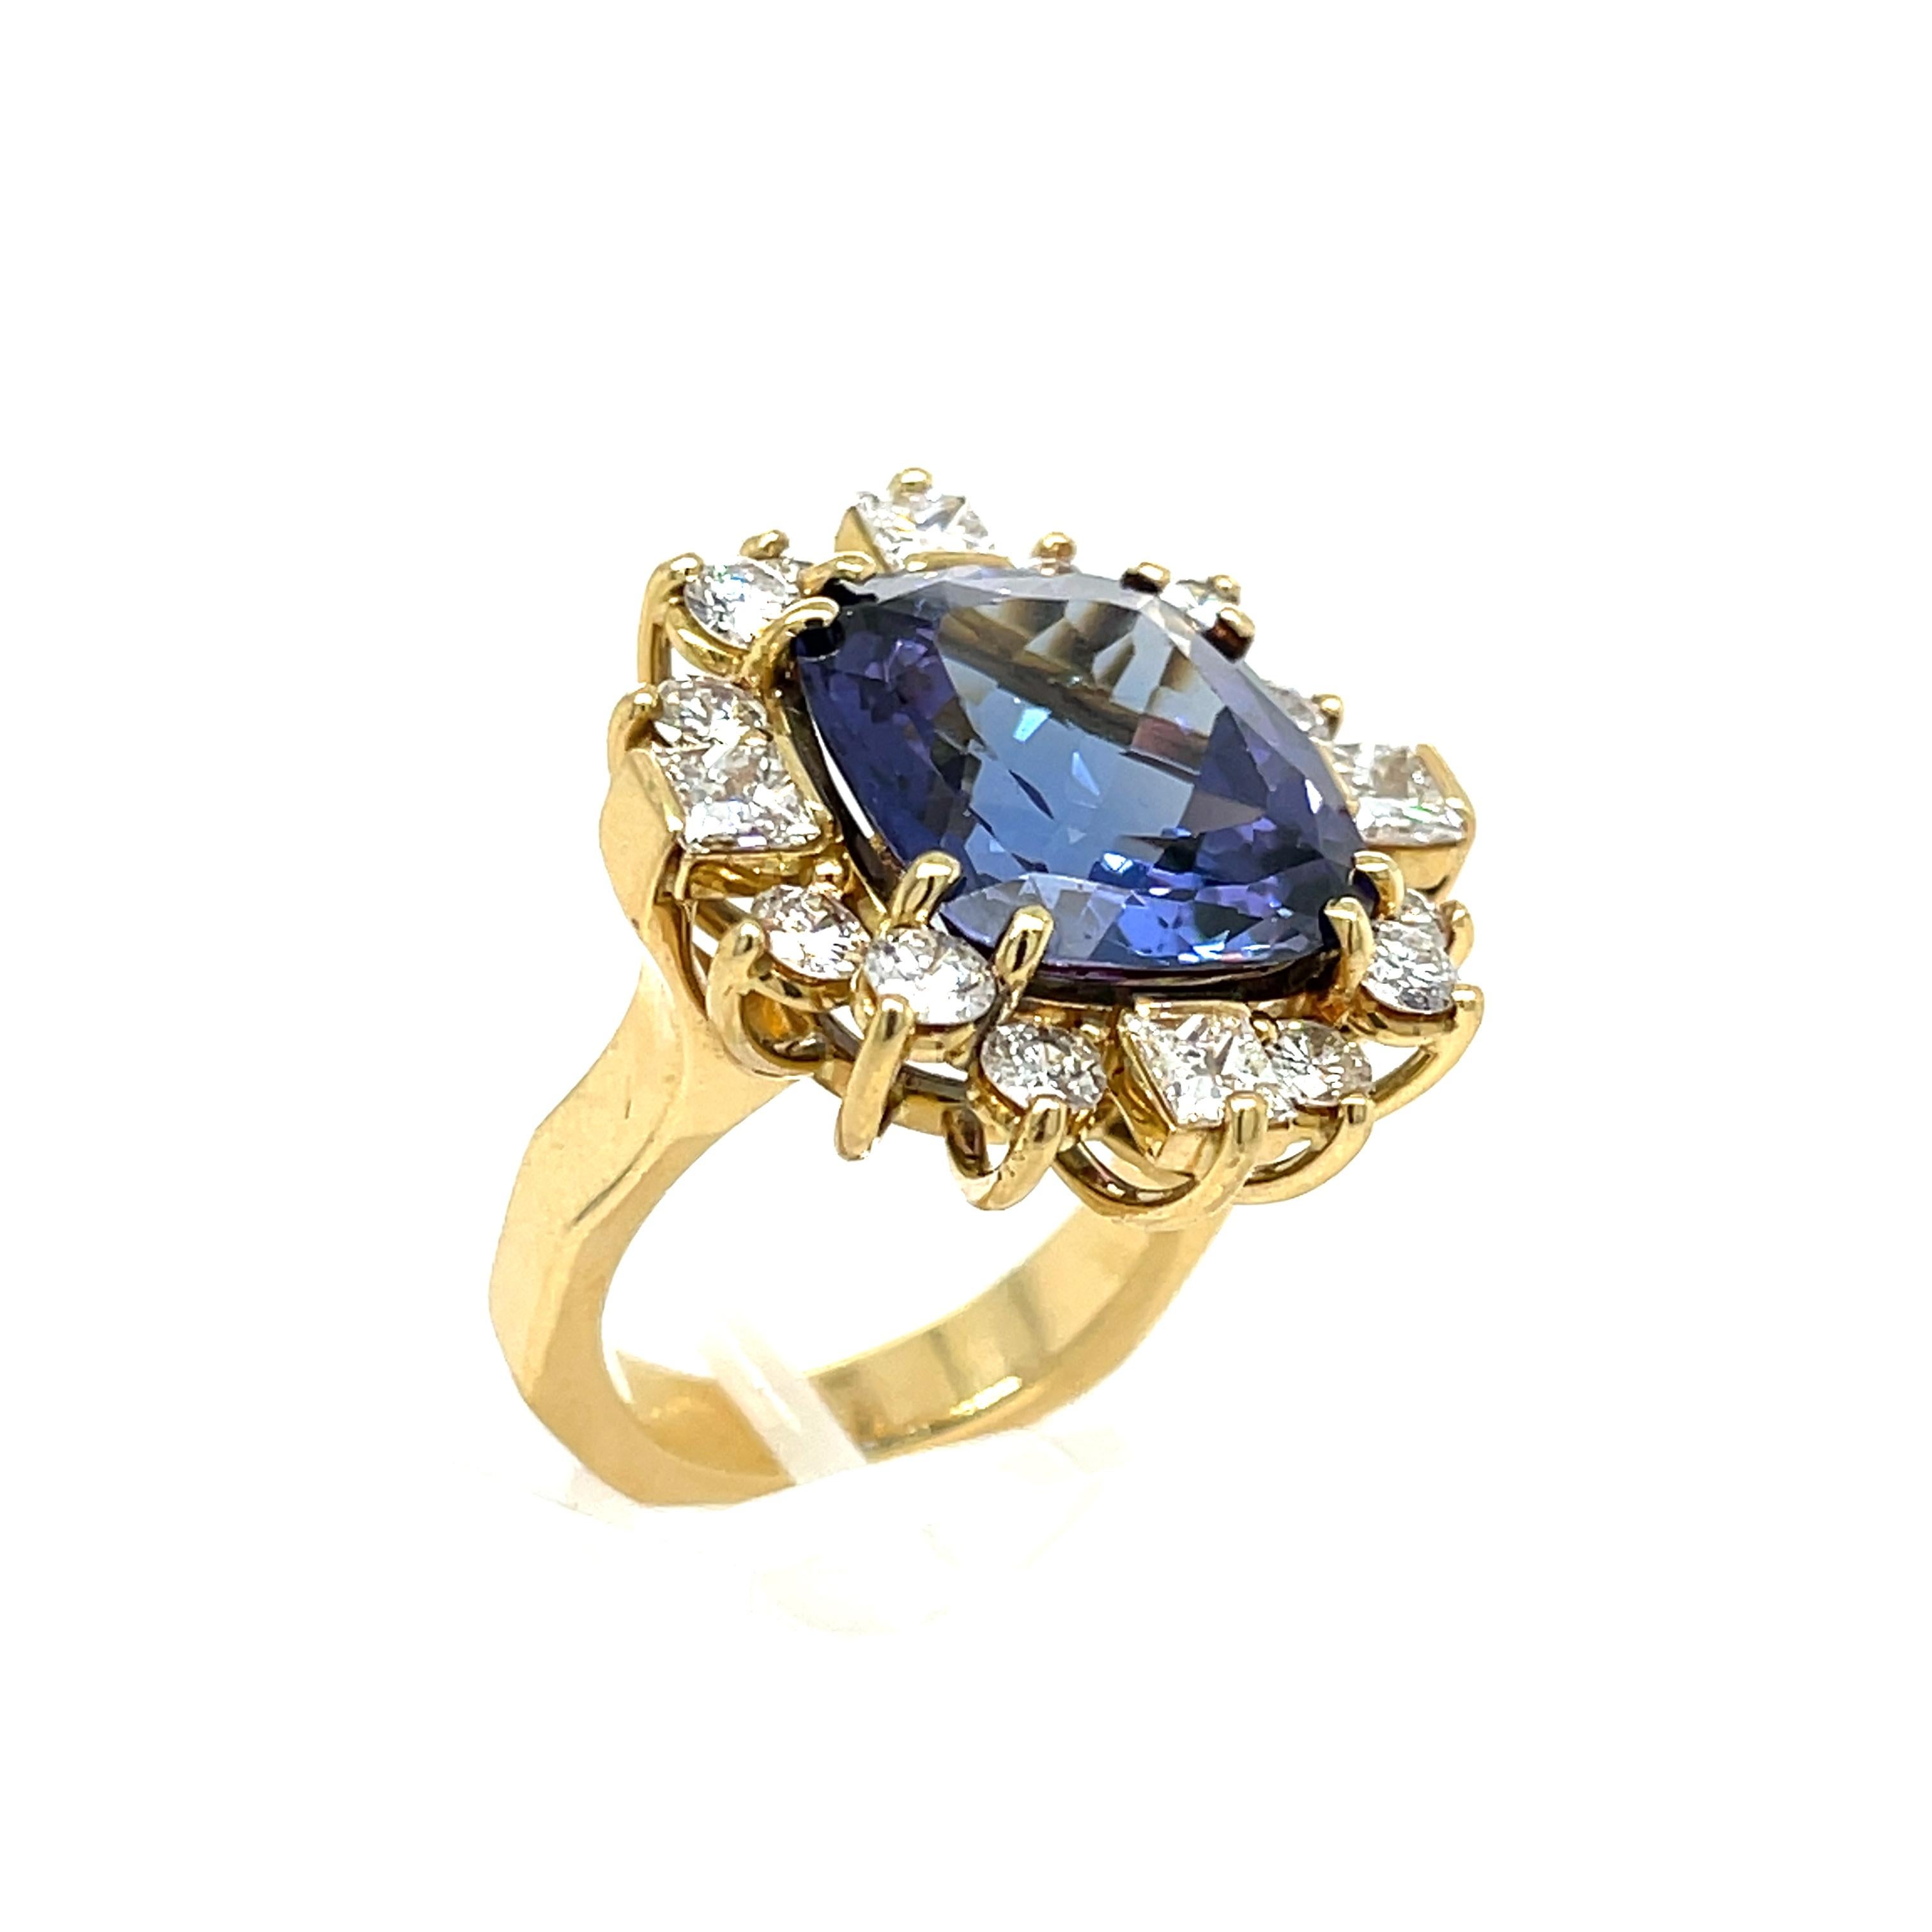 Cushion Cut Tanzanite '16.20ct' and Diamond Ring 18K Yellow Gold For Sale